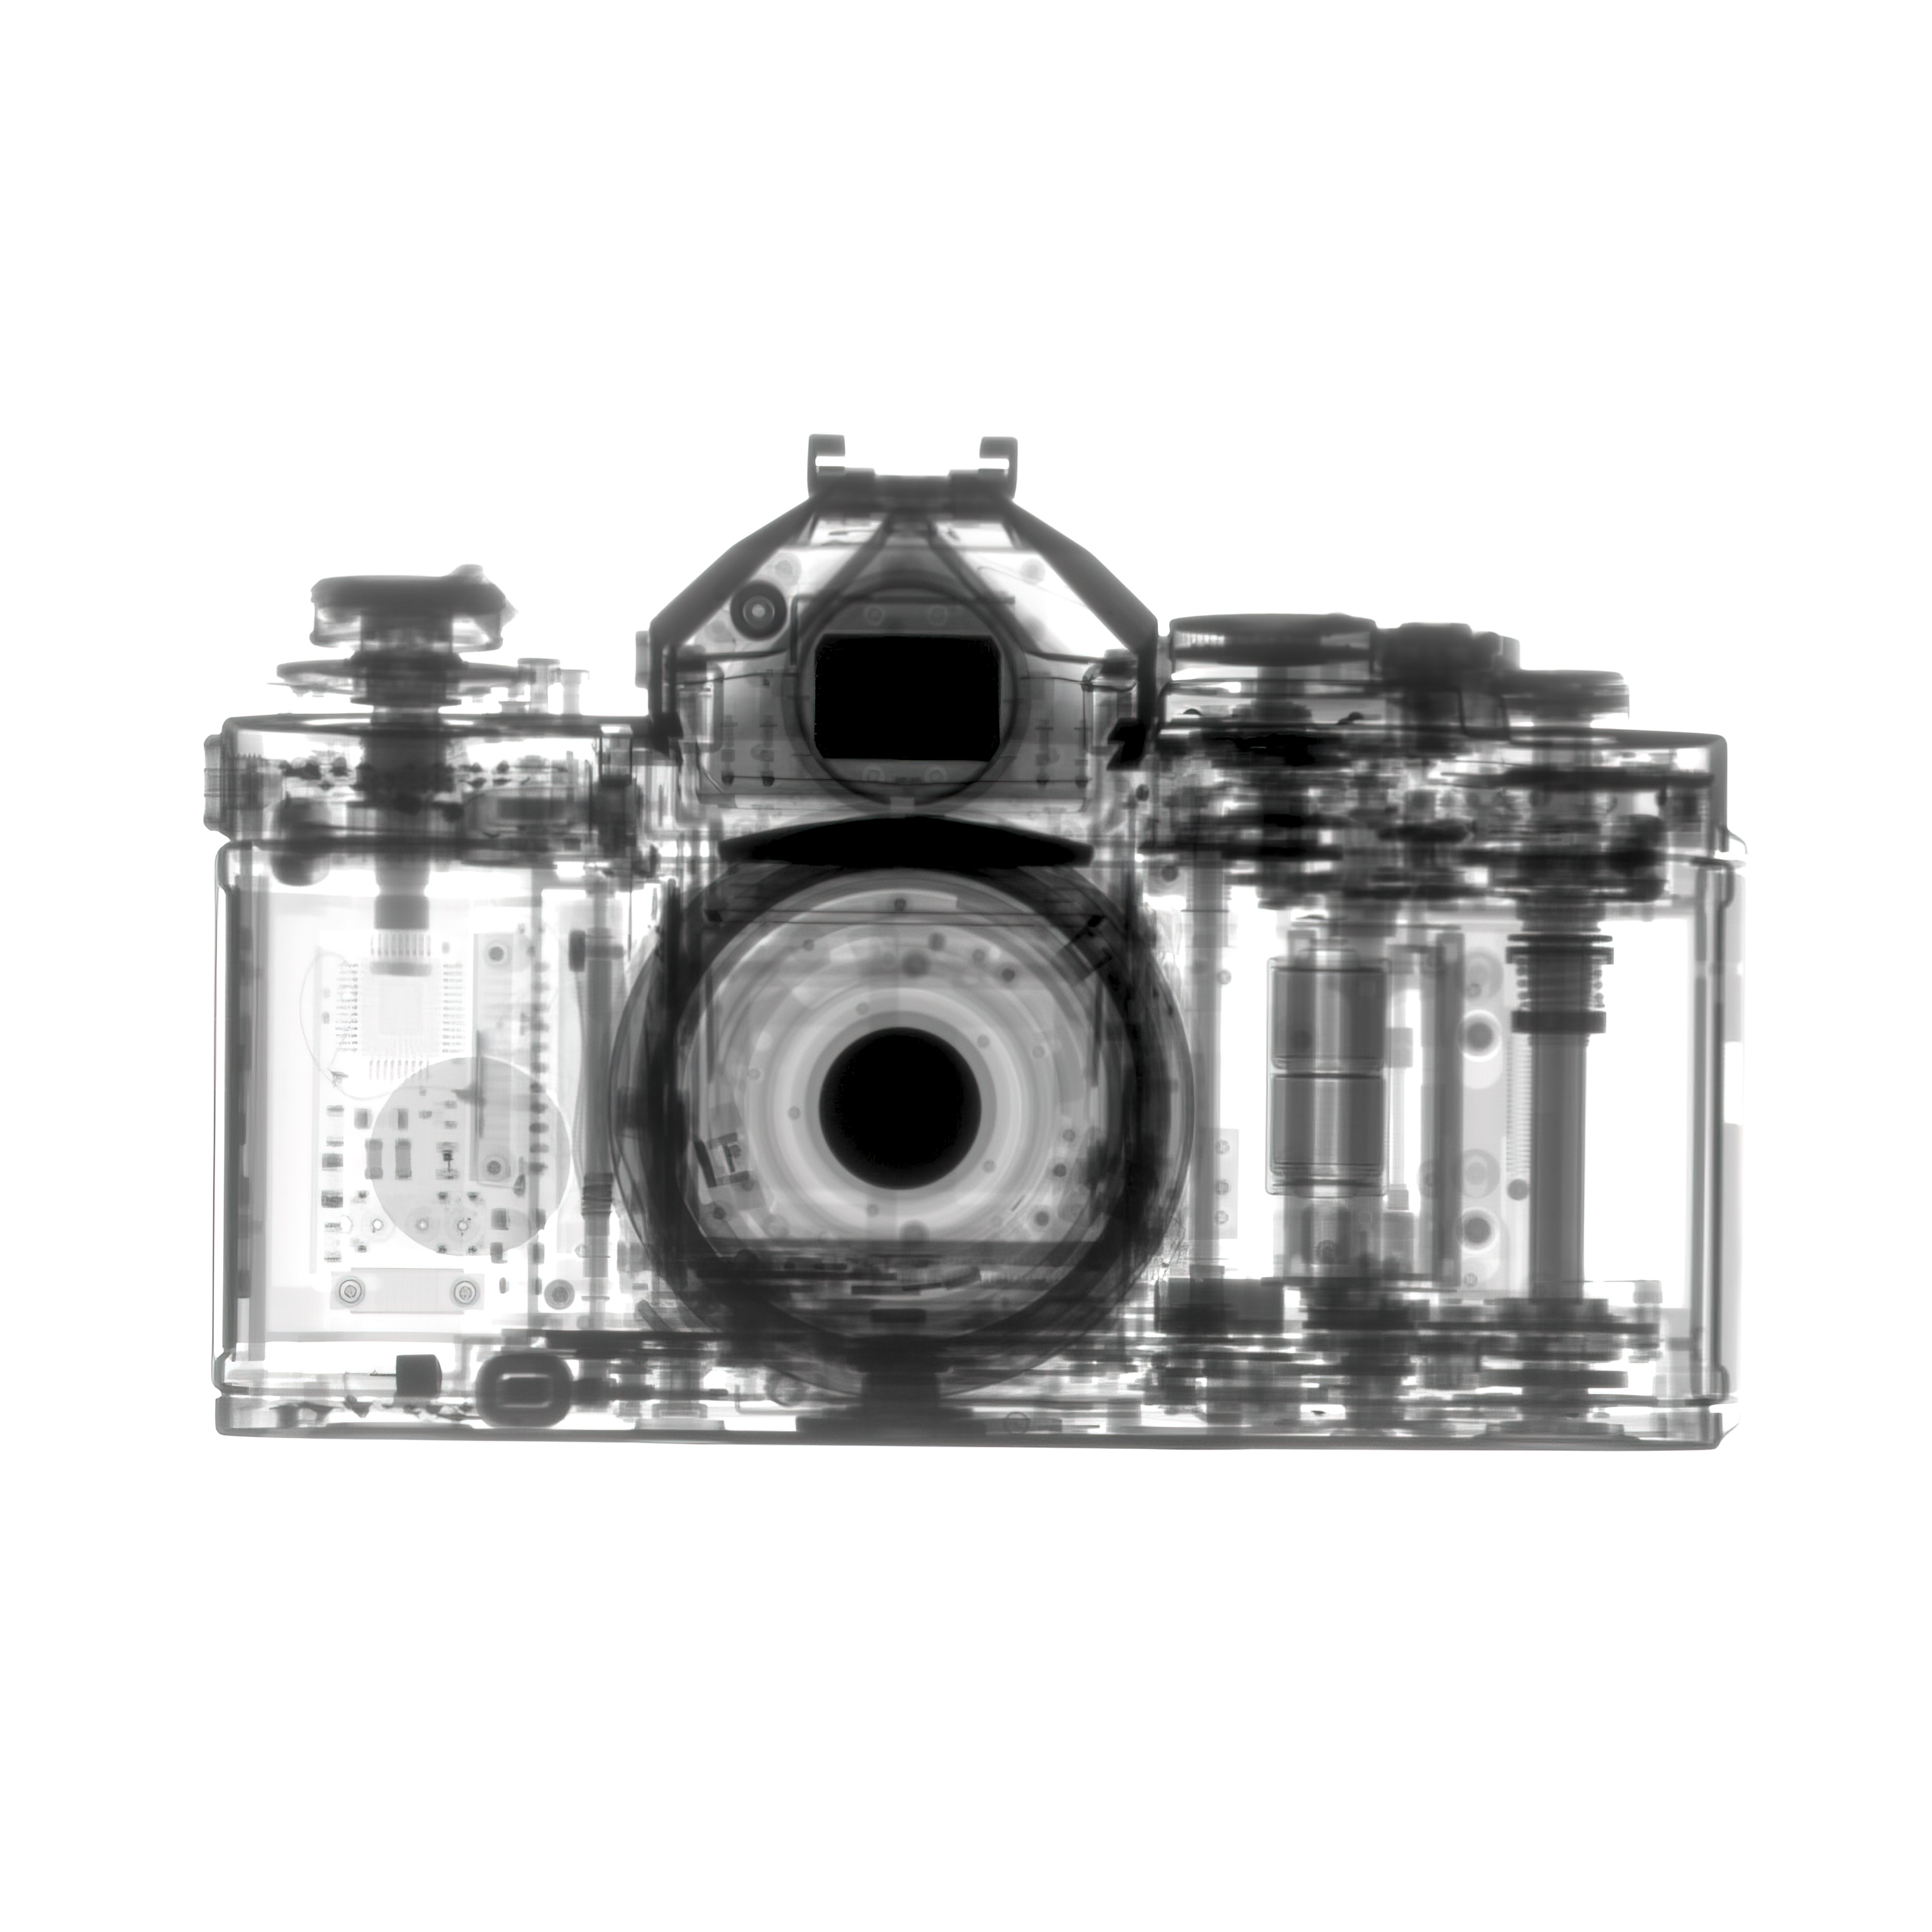 Seeing Camera Innards Is What Mario Aumüller Finds Really Interesting